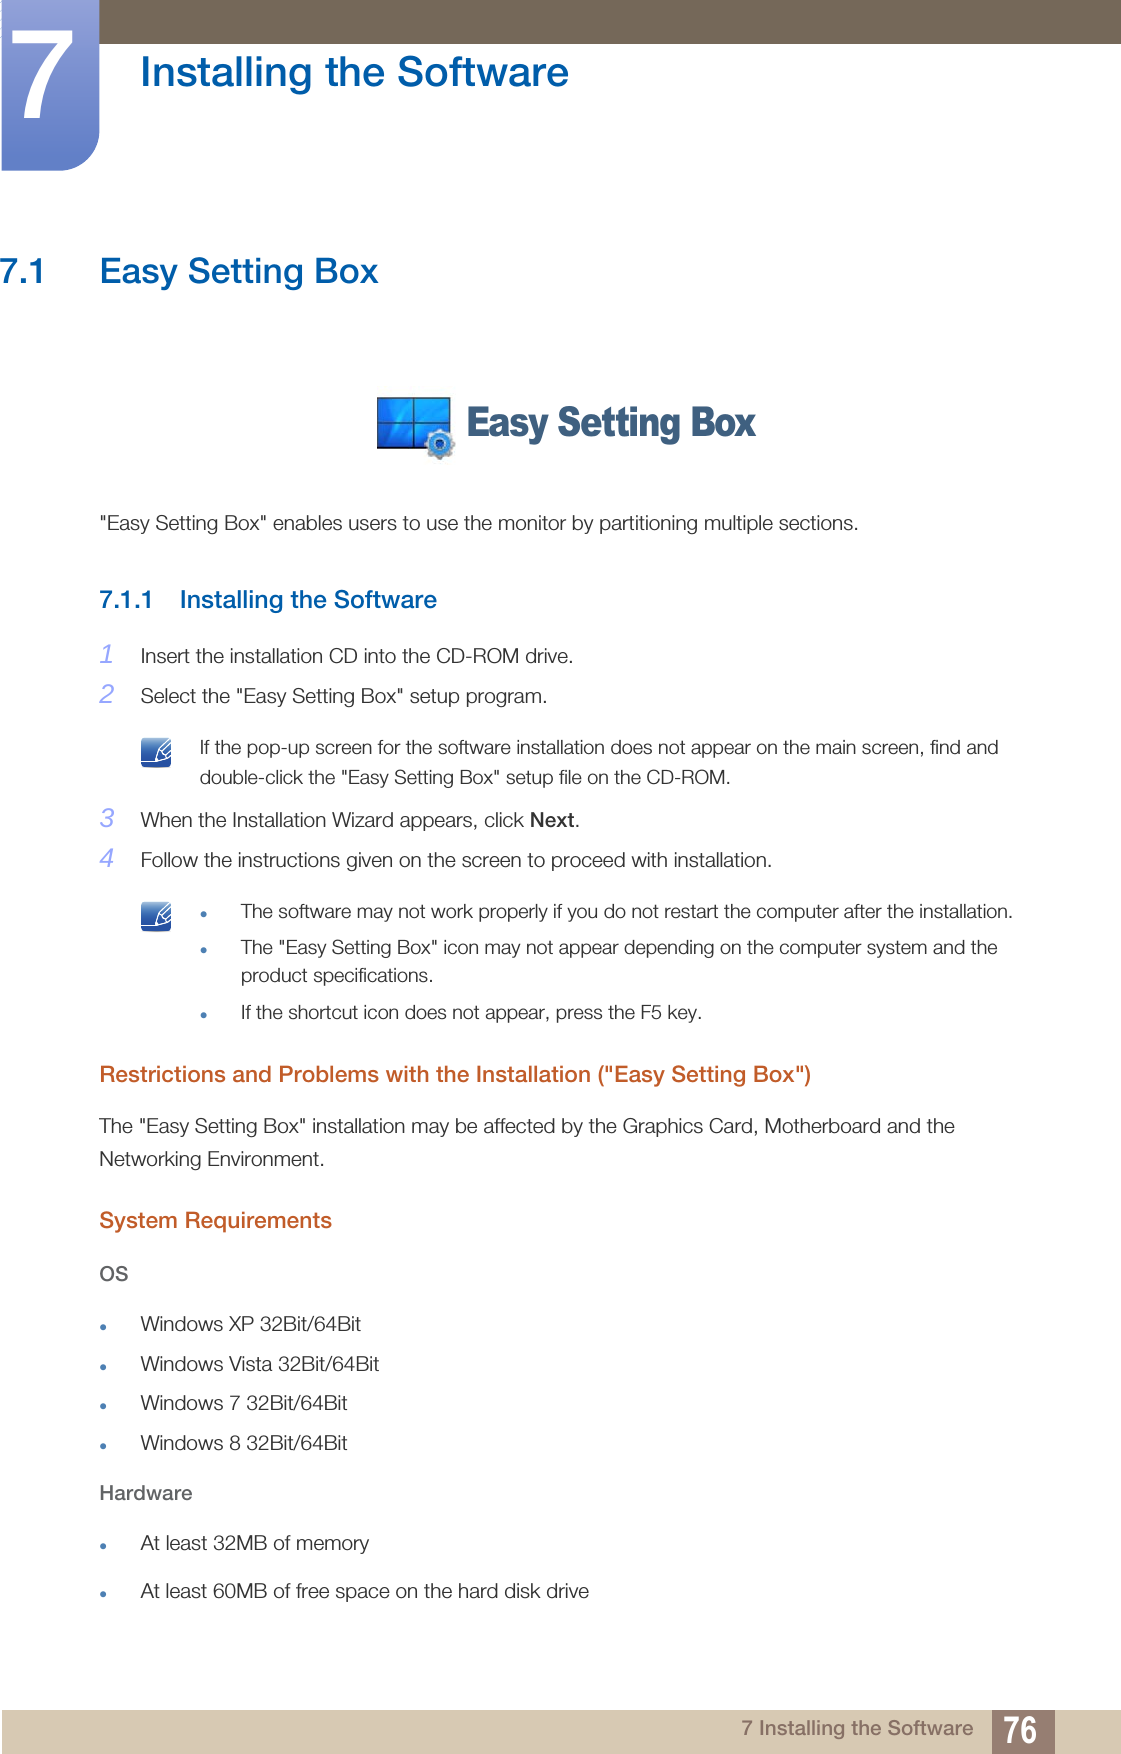 767 Installing the Software7  Installing the Software7.1 Easy Setting Box&quot;Easy Setting Box&quot; enables users to use the monitor by partitioning multiple sections.7.1.1 Installing the Software1Insert the installation CD into the CD-ROM drive.2Select the &quot;Easy Setting Box&quot; setup program. If the pop-up screen for the software installation does not appear on the main screen, find and double-click the &quot;Easy Setting Box&quot; setup file on the CD-ROM. 3When the Installation Wizard appears, click Next.4Follow the instructions given on the screen to proceed with installation. The software may not work properly if you do not restart the computer after the installation.The &quot;Easy Setting Box&quot; icon may not appear depending on the computer system and the product specifications.If the shortcut icon does not appear, press the F5 key. Restrictions and Problems with the Installation (&quot;Easy Setting Box&quot;)The &quot;Easy Setting Box&quot; installation may be affected by the Graphics Card, Motherboard and the Networking Environment.System RequirementsOSWindows XP 32Bit/64BitWindows Vista 32Bit/64BitWindows 7 32Bit/64BitWindows 8 32Bit/64BitHardwareAt least 32MB of memoryAt least 60MB of free space on the hard disk driveEasy Setting Box